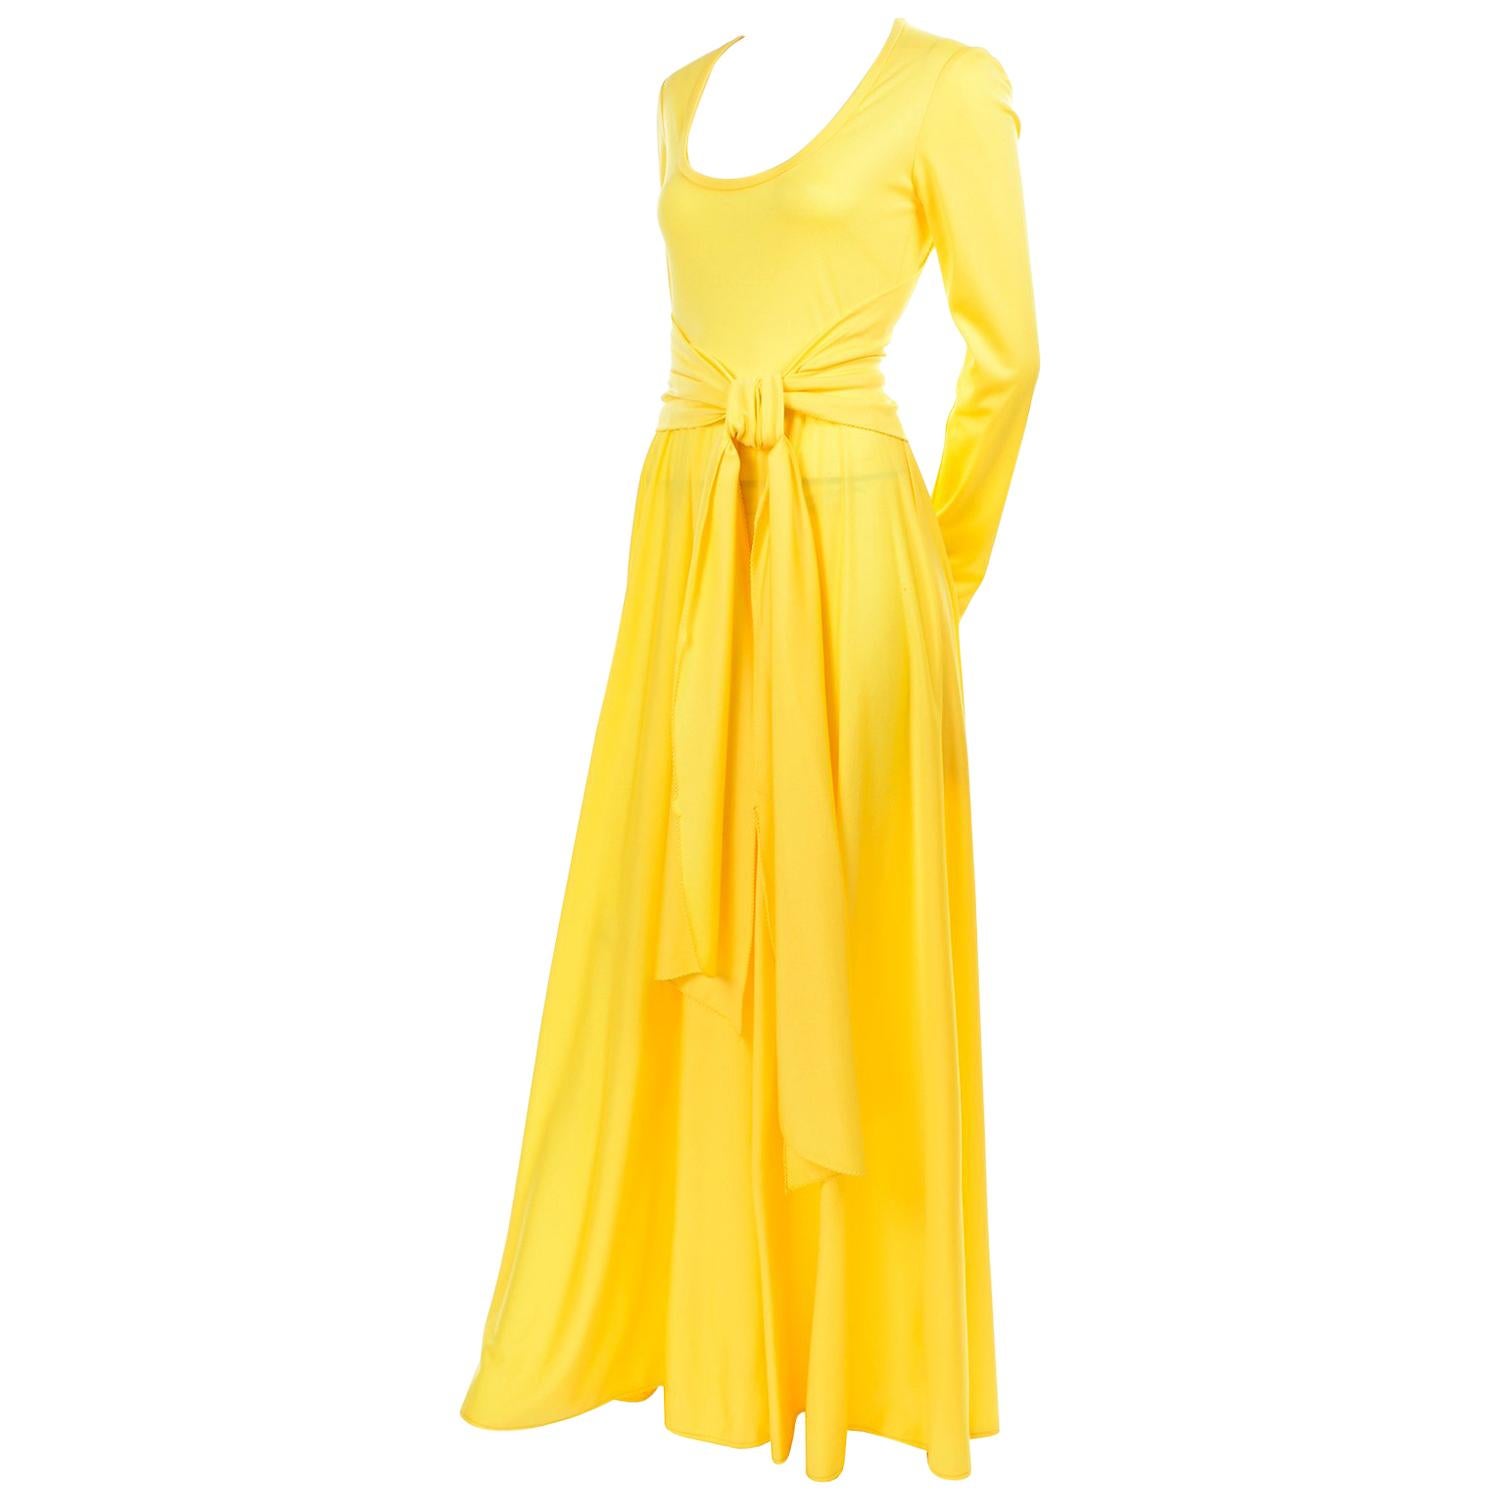 Lillie Rubin Collection 700 Vintage Dress in Yellow Jersey With Sash